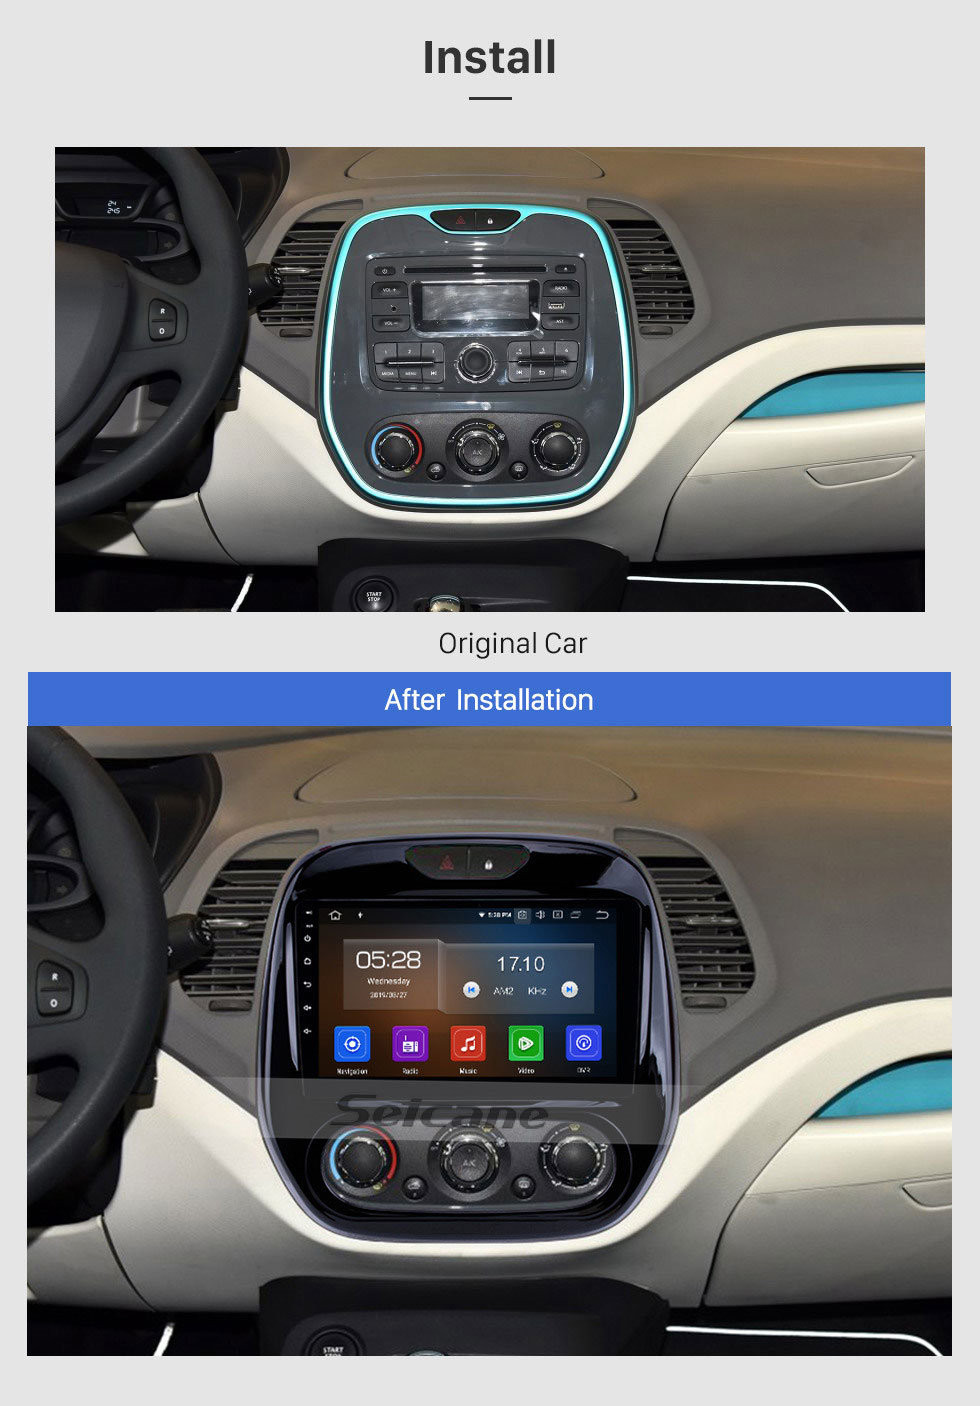 Seicane 9 inch Android 11.0 HD Touch Screen Head Unit GPS Navigation System for 2011-2016 Renault Captur CLIO Samsung QM3 Manual A/C Bluetooth Radio WIFI DVR Video USB Mirror link